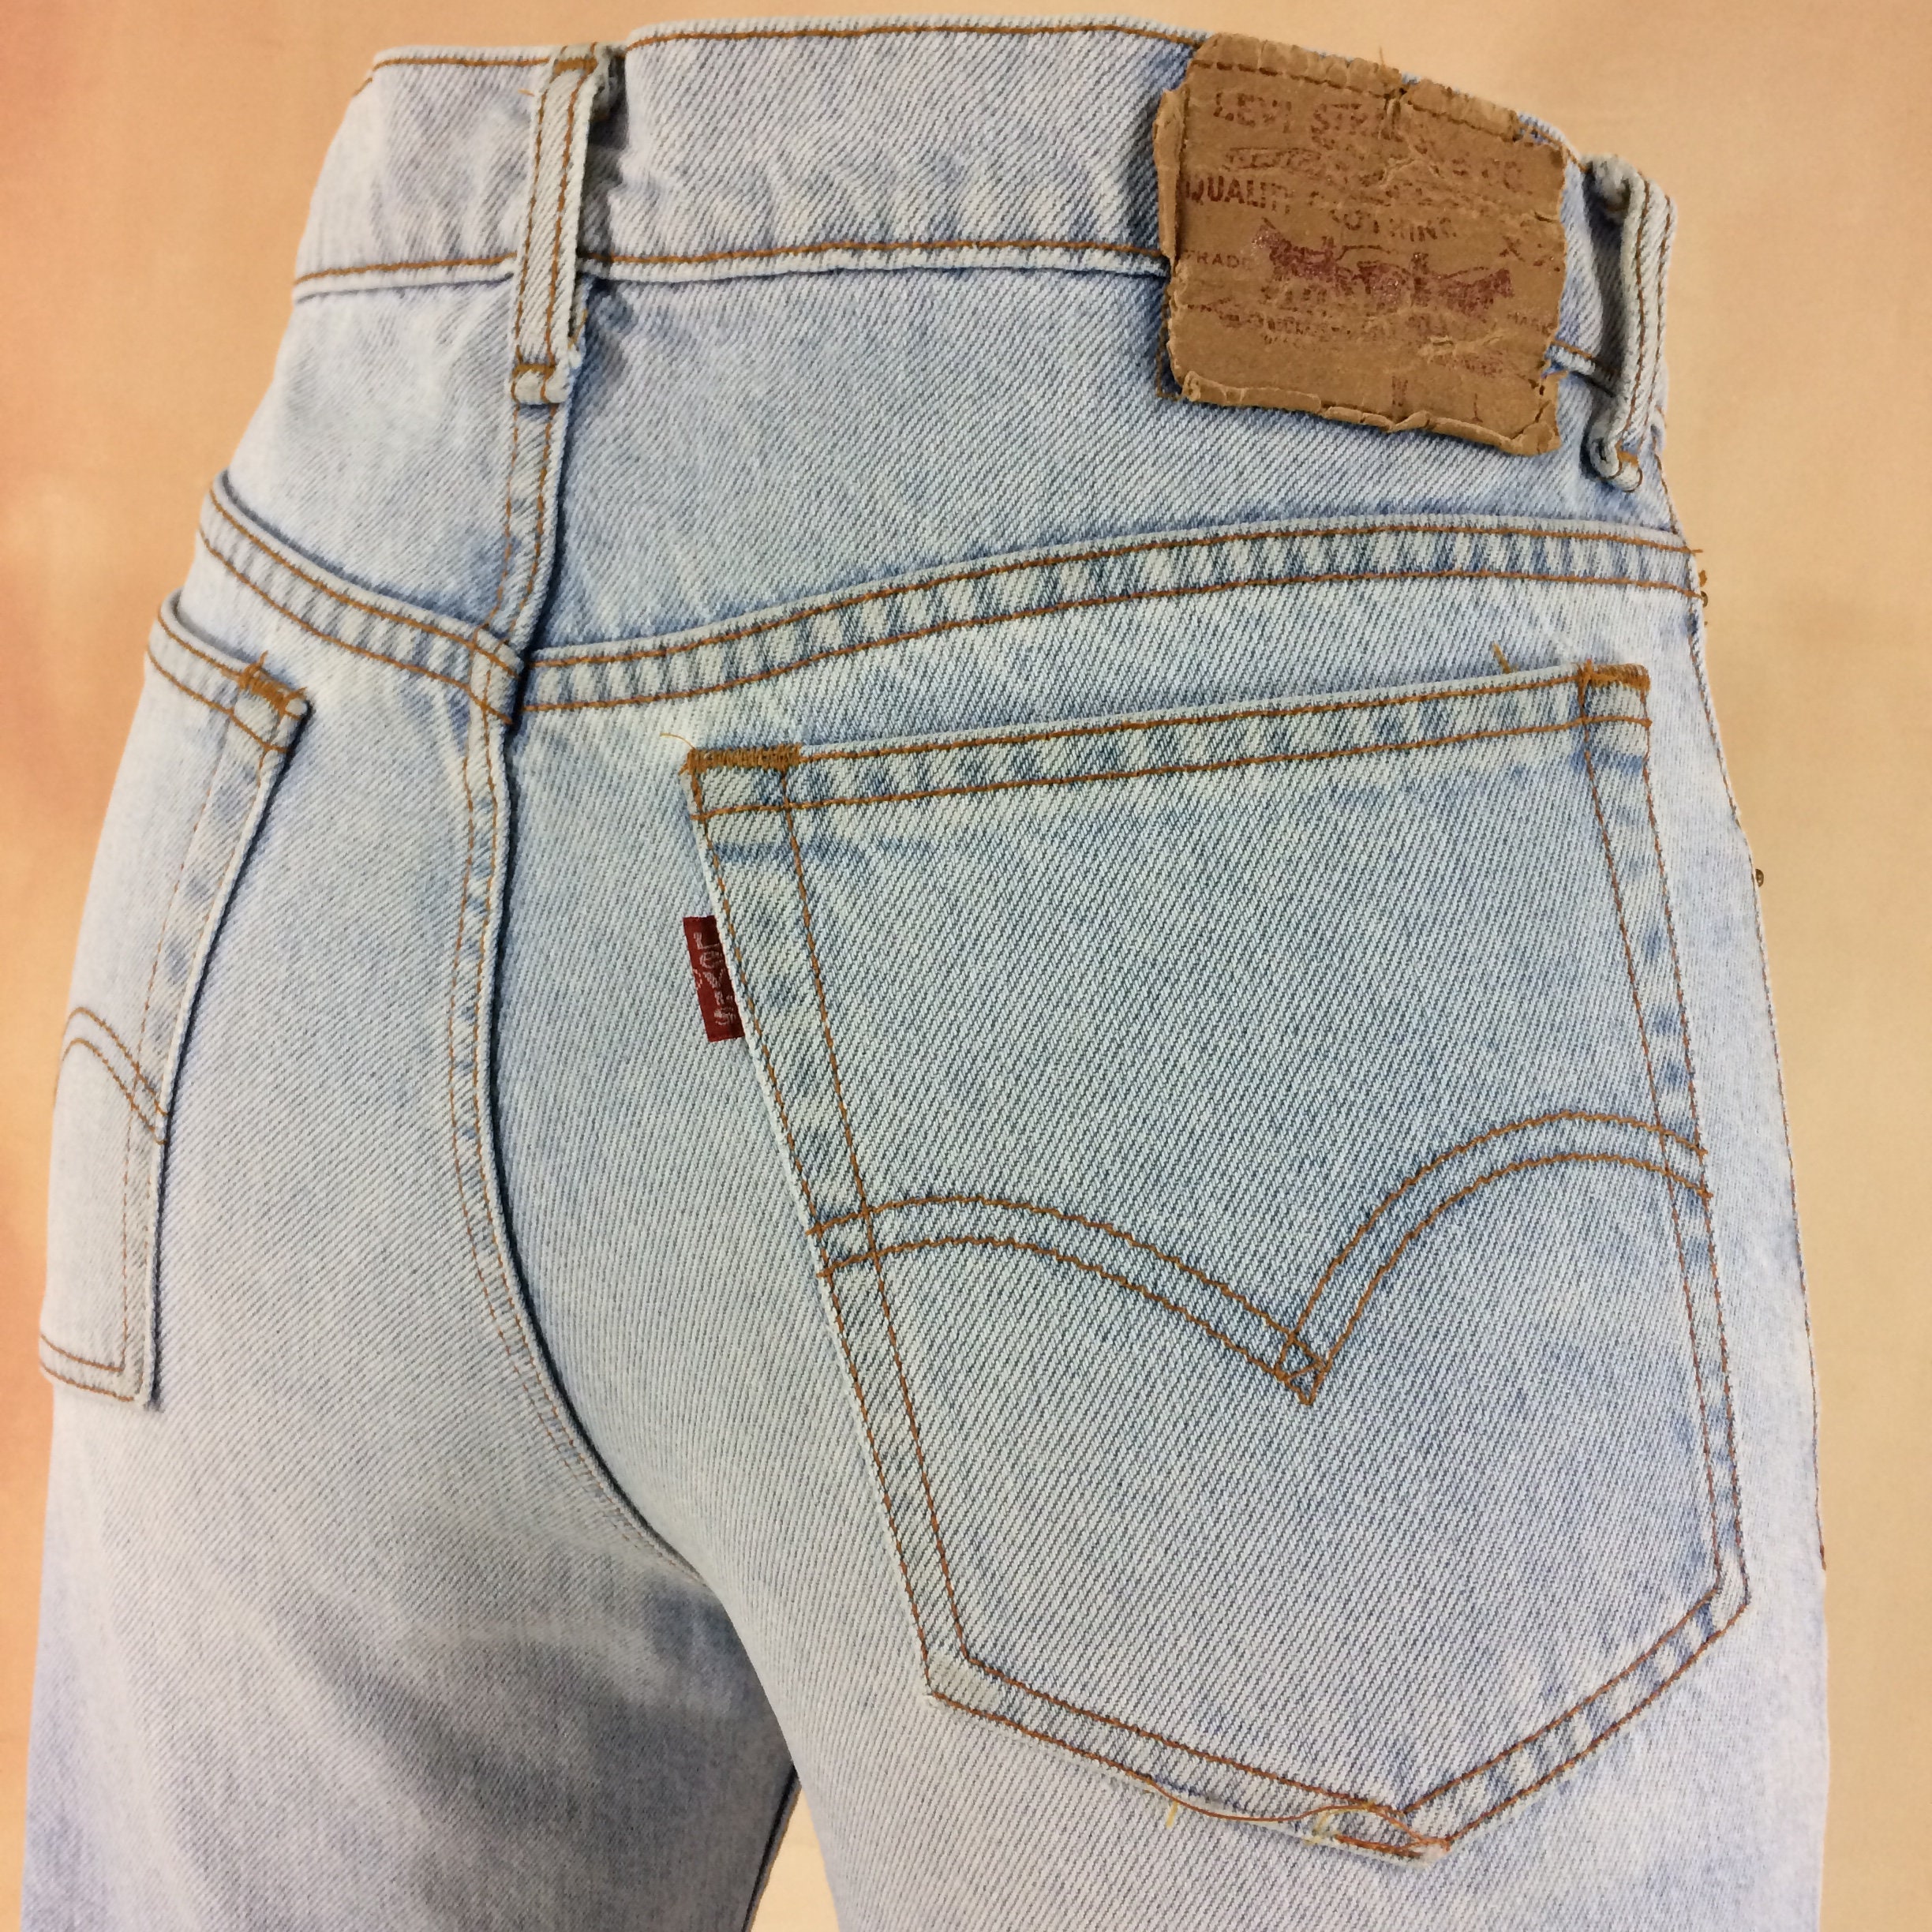 Ripped Butt Levis - Etsy